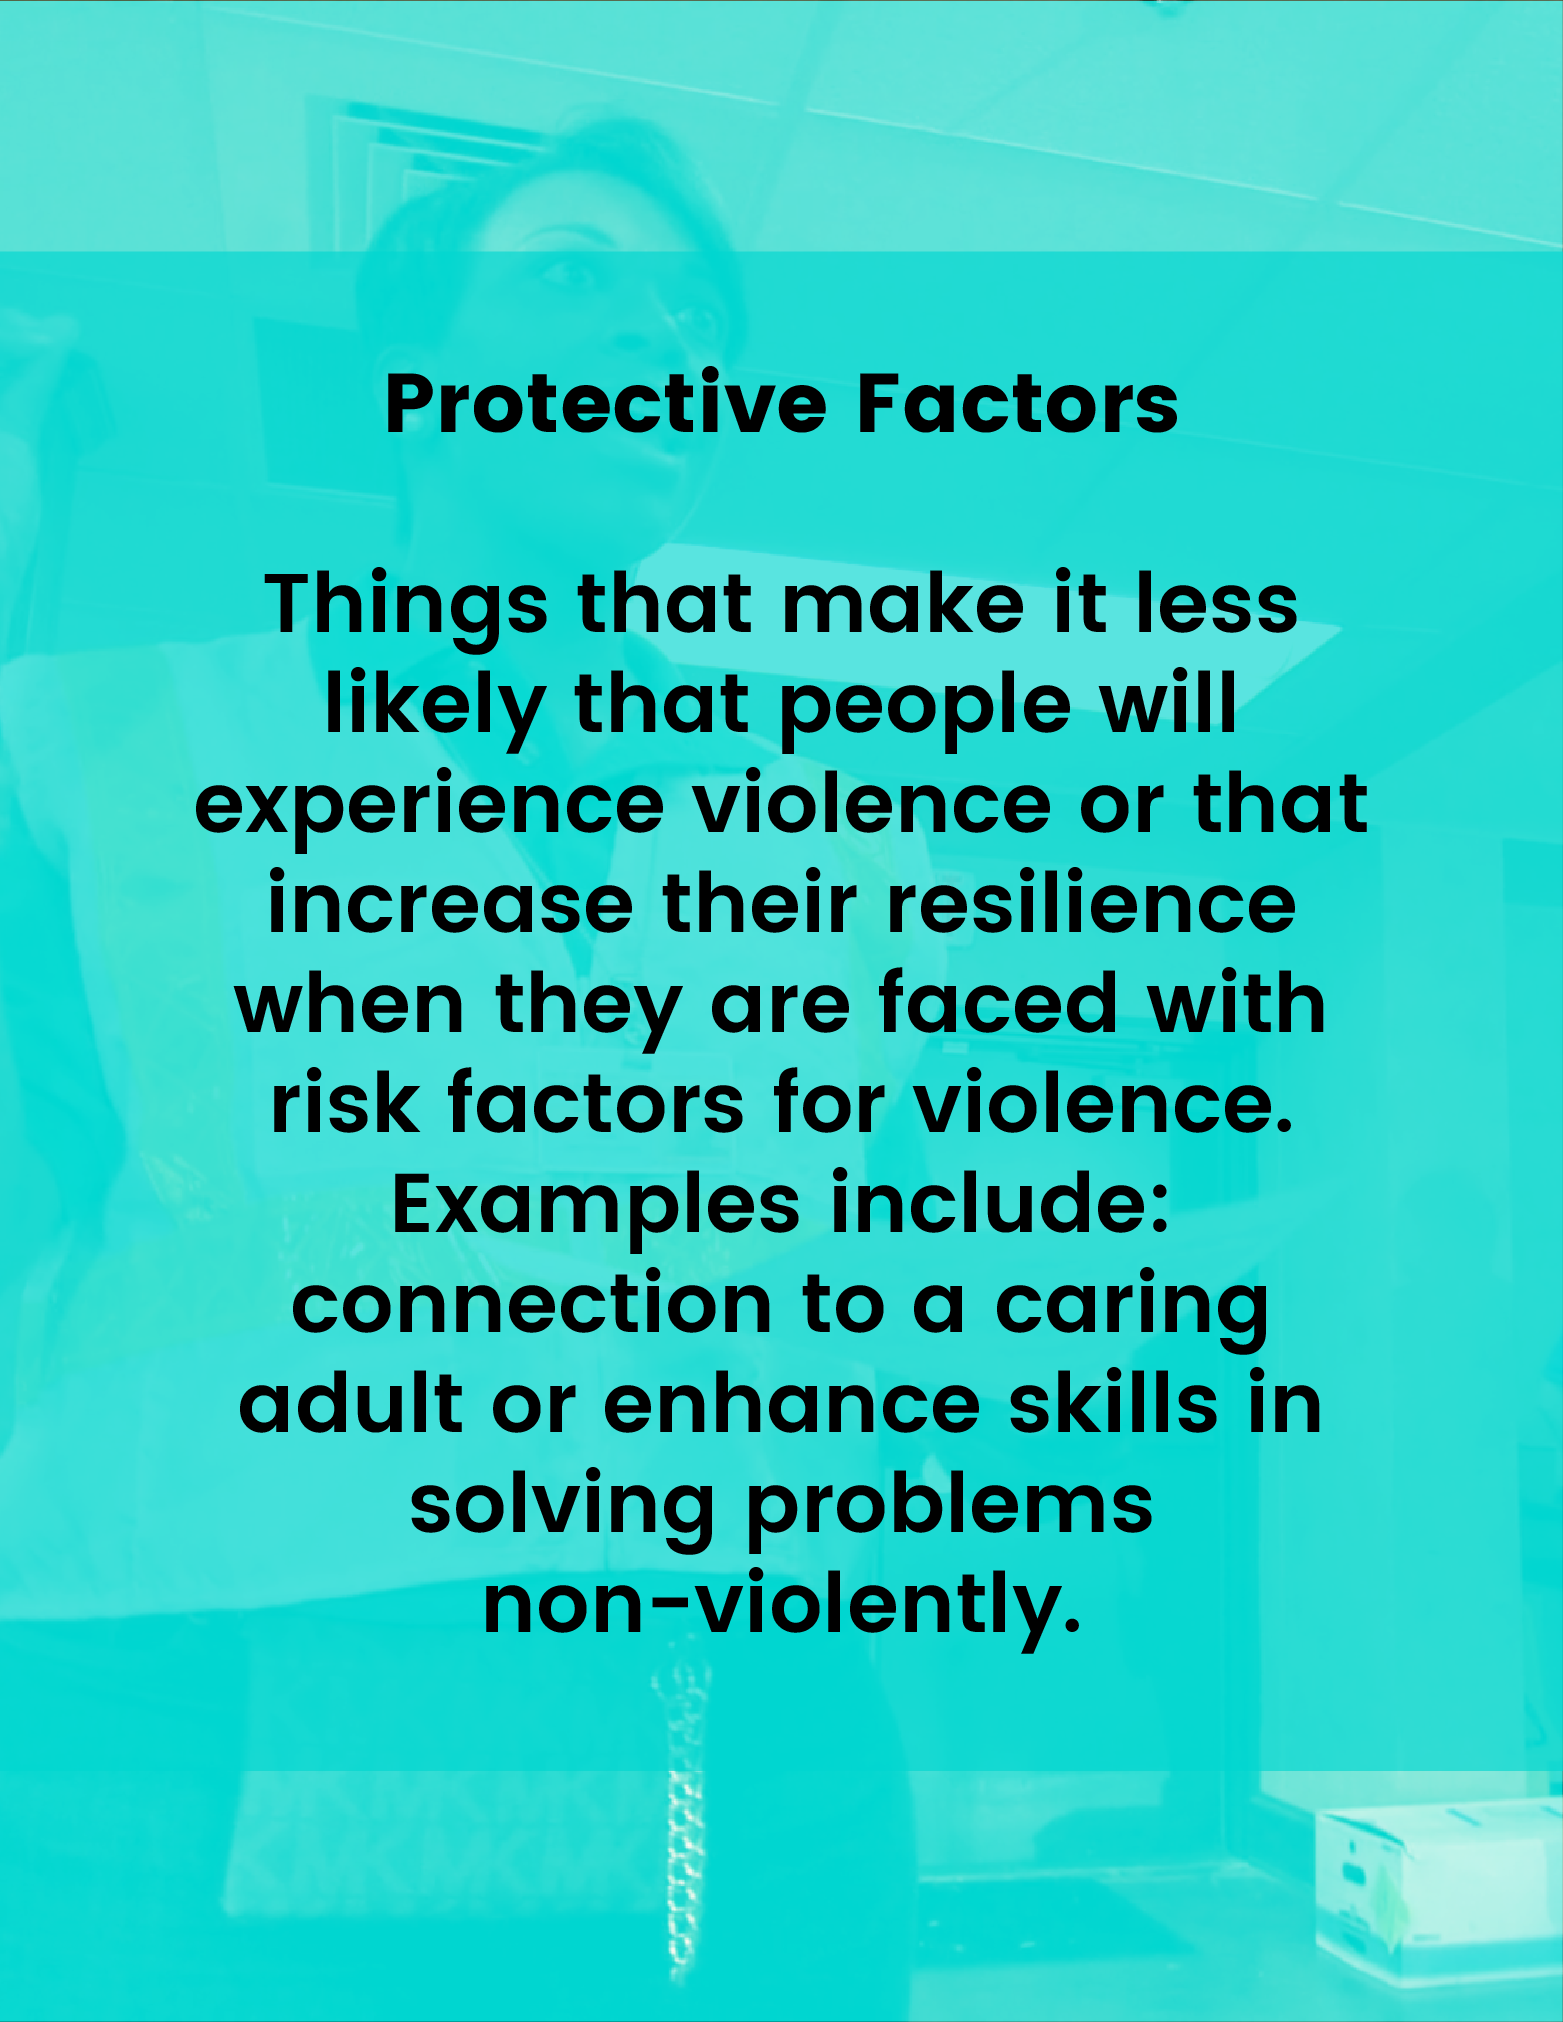 Protective Factors - Things that make it less likely that people will experience violence or that increase their resilience when they are faced with risk factors for violence. Examples include: connection to a caring adult or access to mental health services.